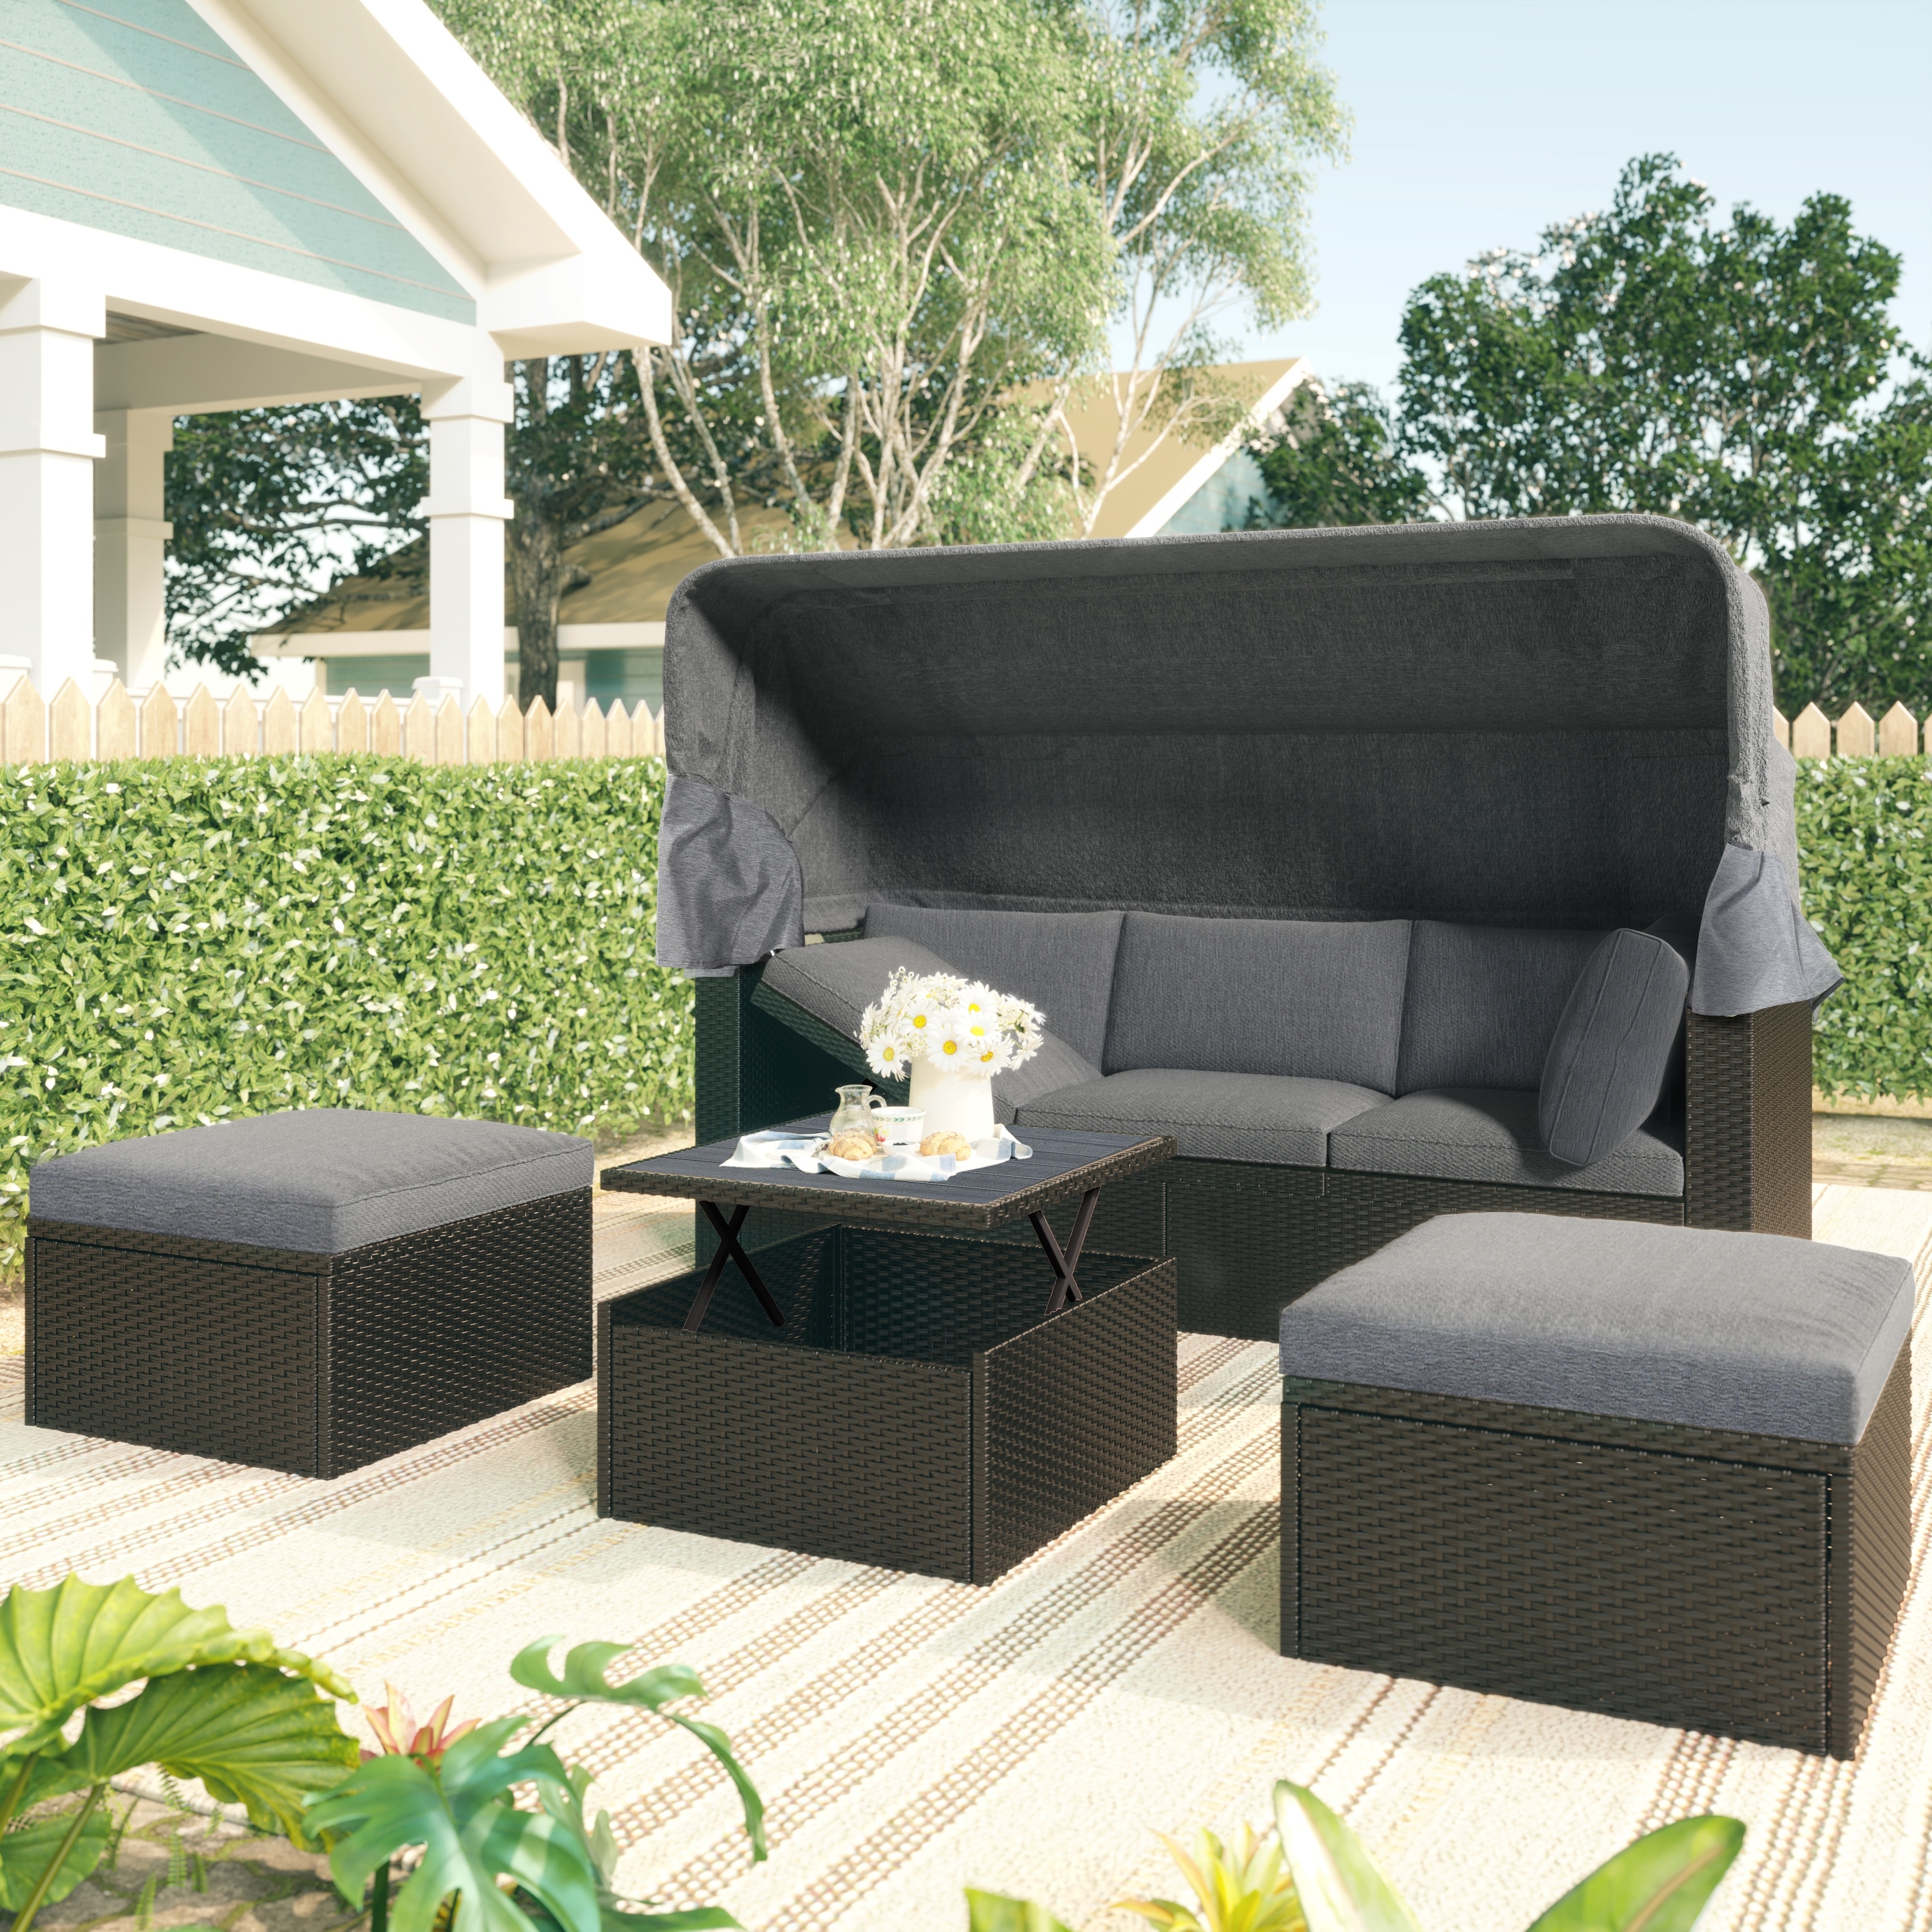 Outdoor Patio Rectangle Daybed With Retractable Canopy